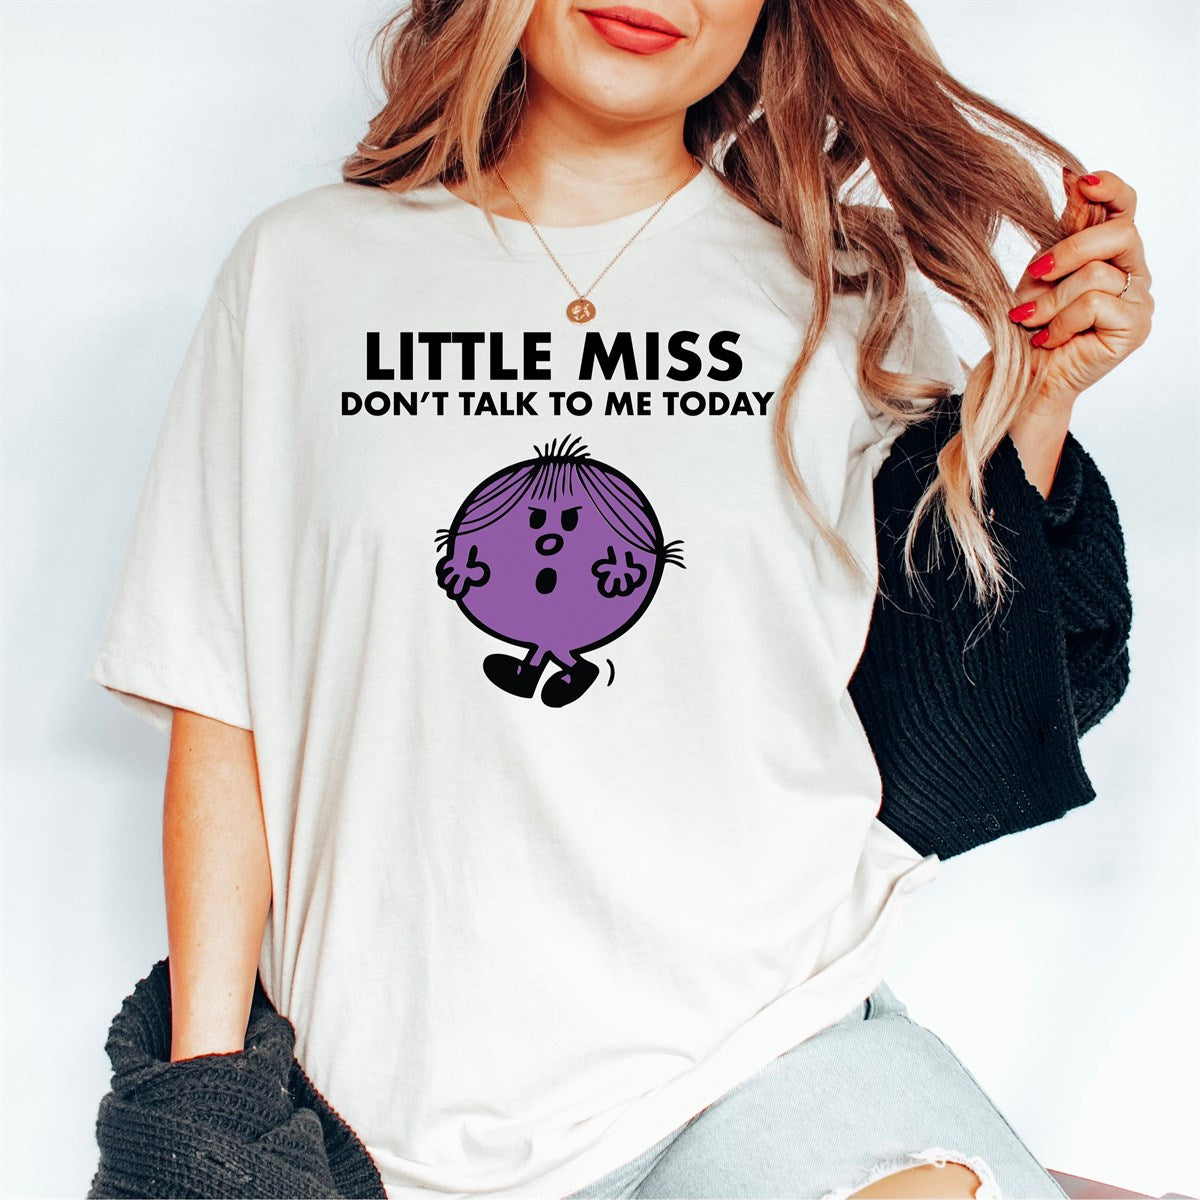 Little Miss Collection